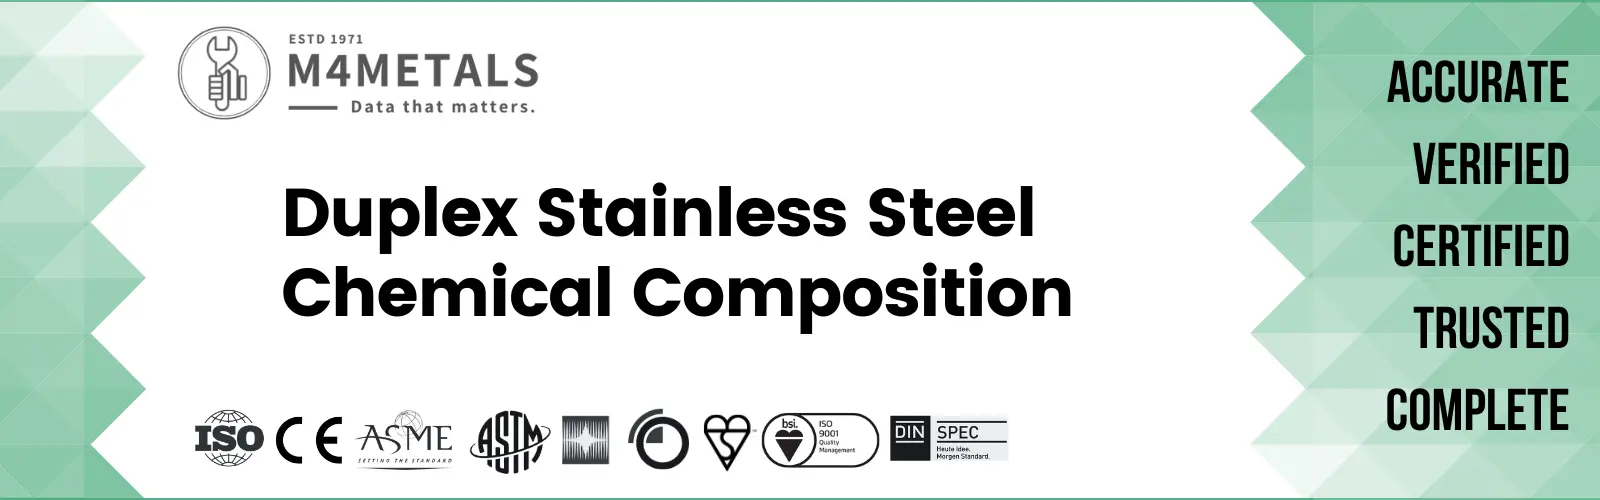 Duplex Stainless Steel Chemical Composition